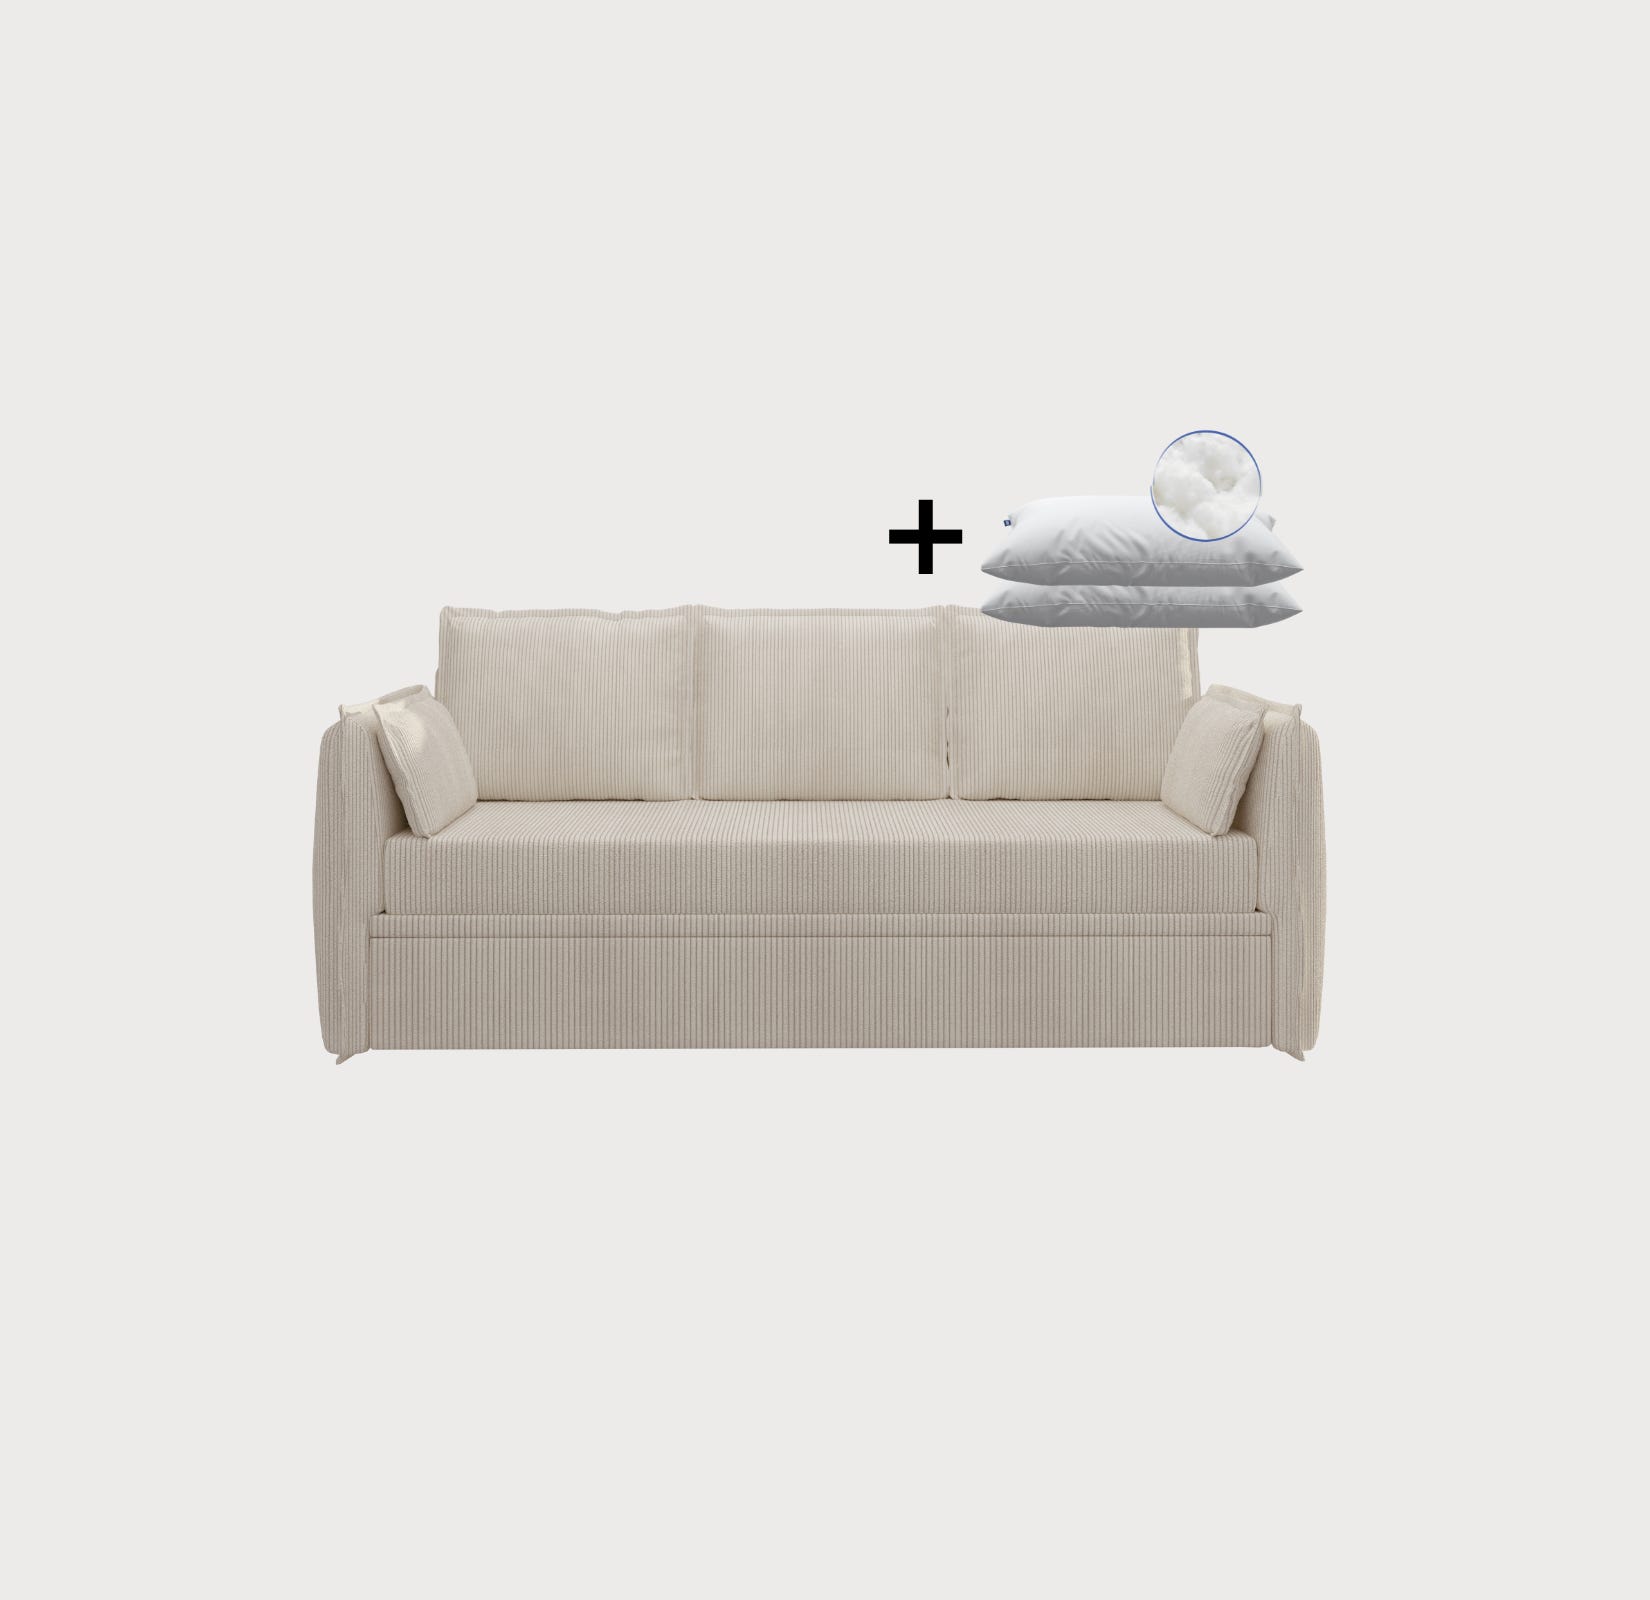 BE_Beds_Sofabed_Bundle_Mobile_PCardV2.png